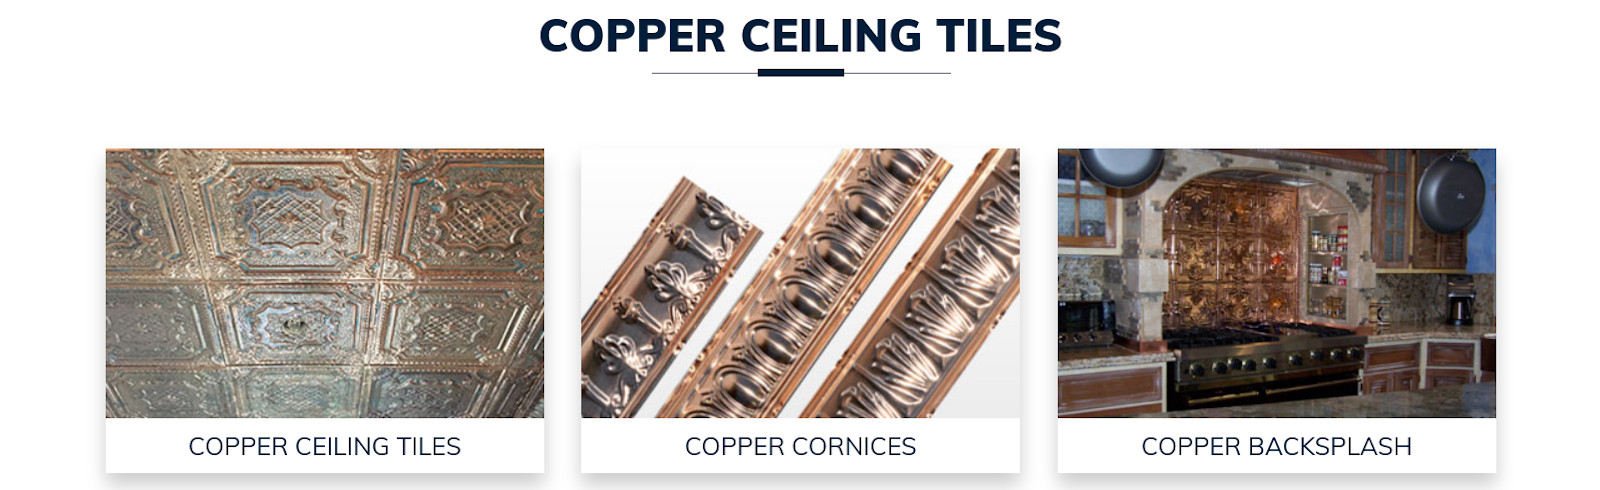 copper ceiling tiles price reduction